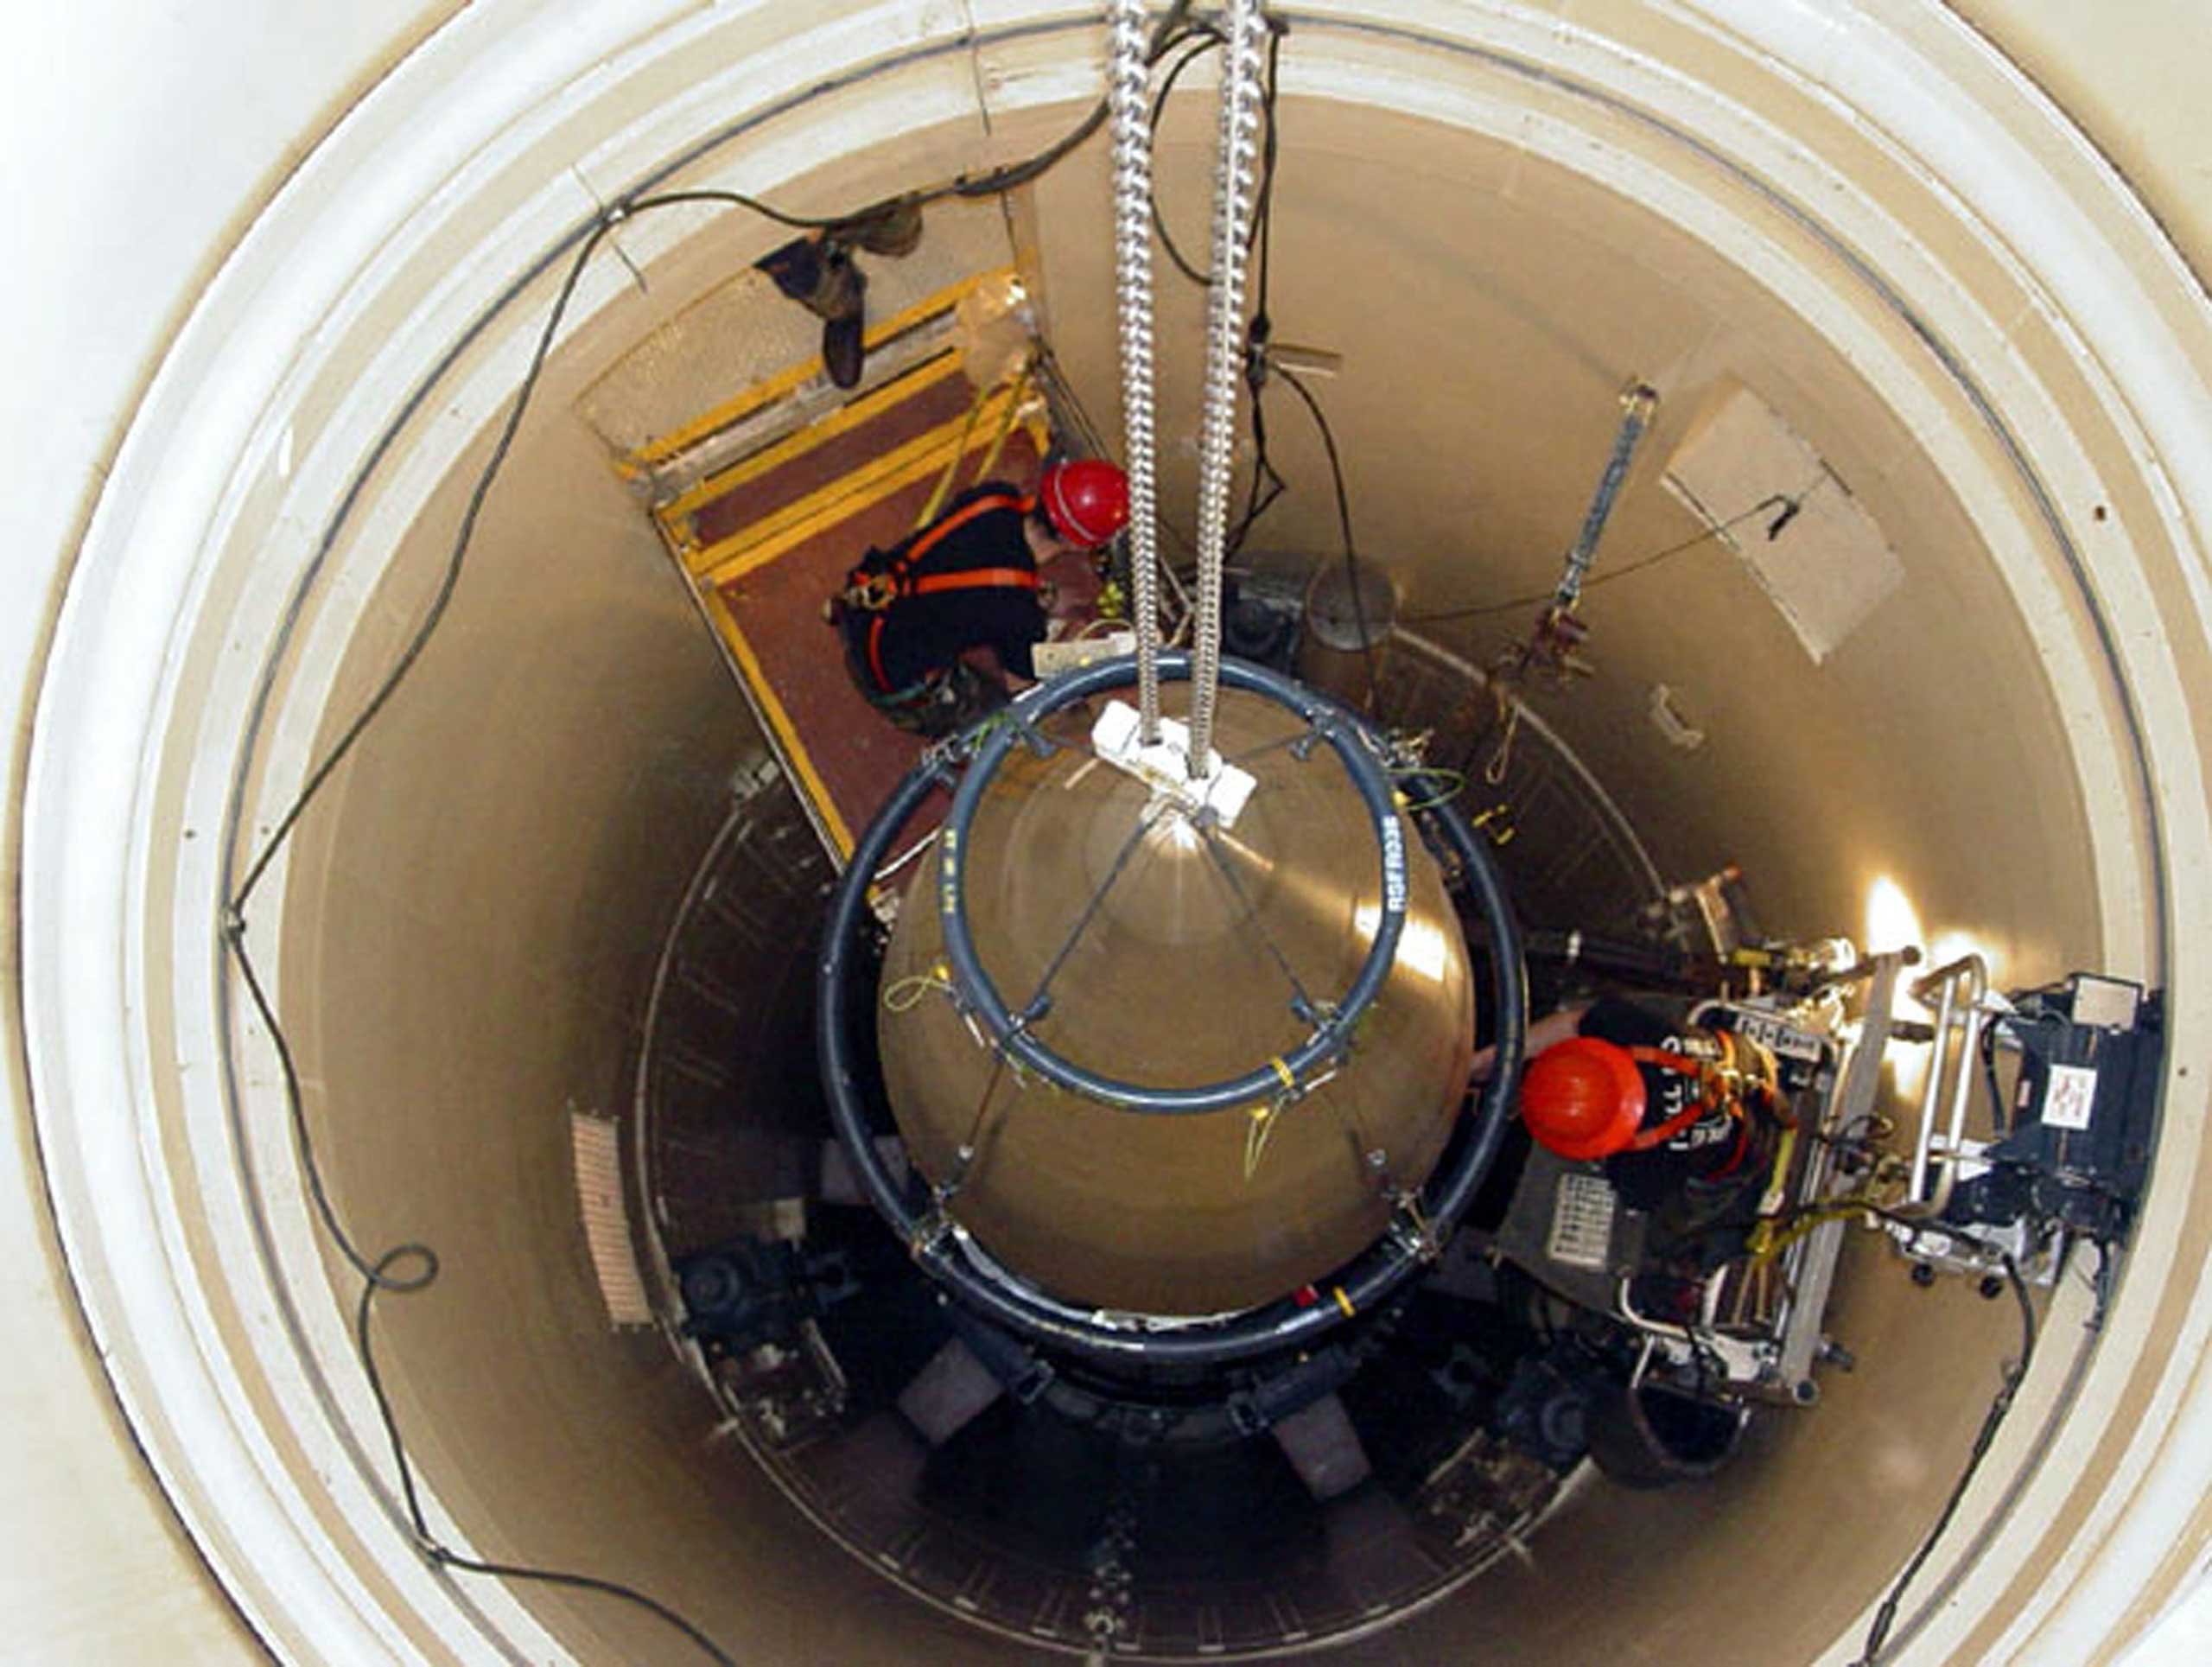 A US Air Force missile maintenance team removes the upper section of an intercontinental ballistic missile with a nuclear warhead in an undated USAF photo at Malmstrom Air Force Base, Montana. (Airman John Parie—U.S. Air Force/Reuters)